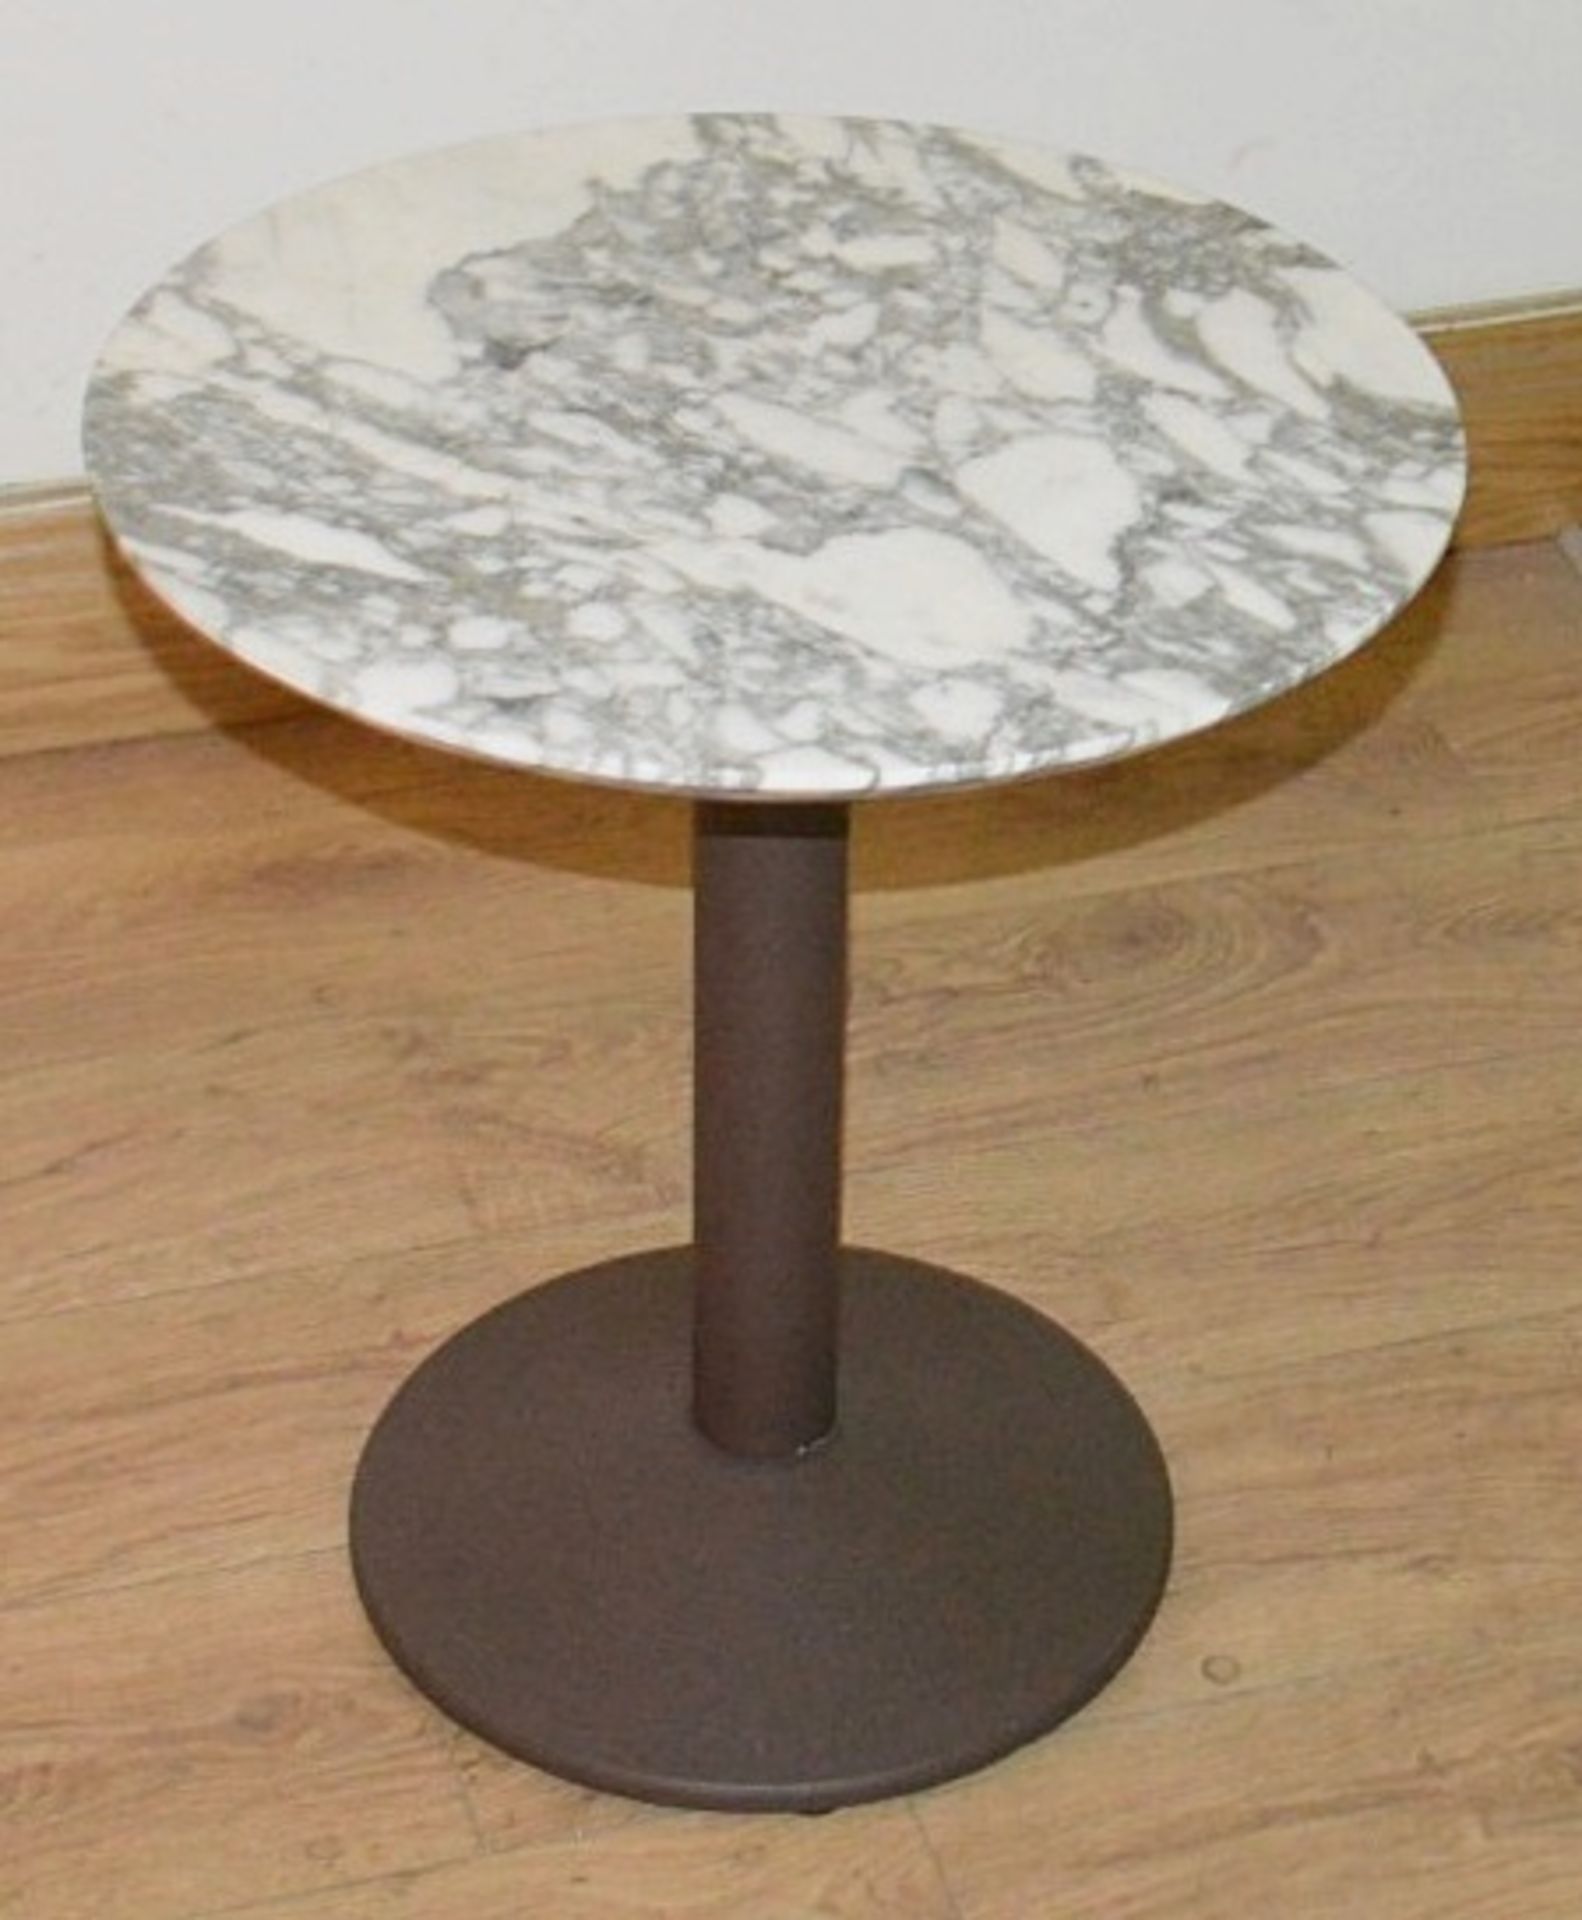 1 x Stone-Topped Occasional Table With Sturdy Metal Base - Dimensions: Height 55 x Diameter 50cm -